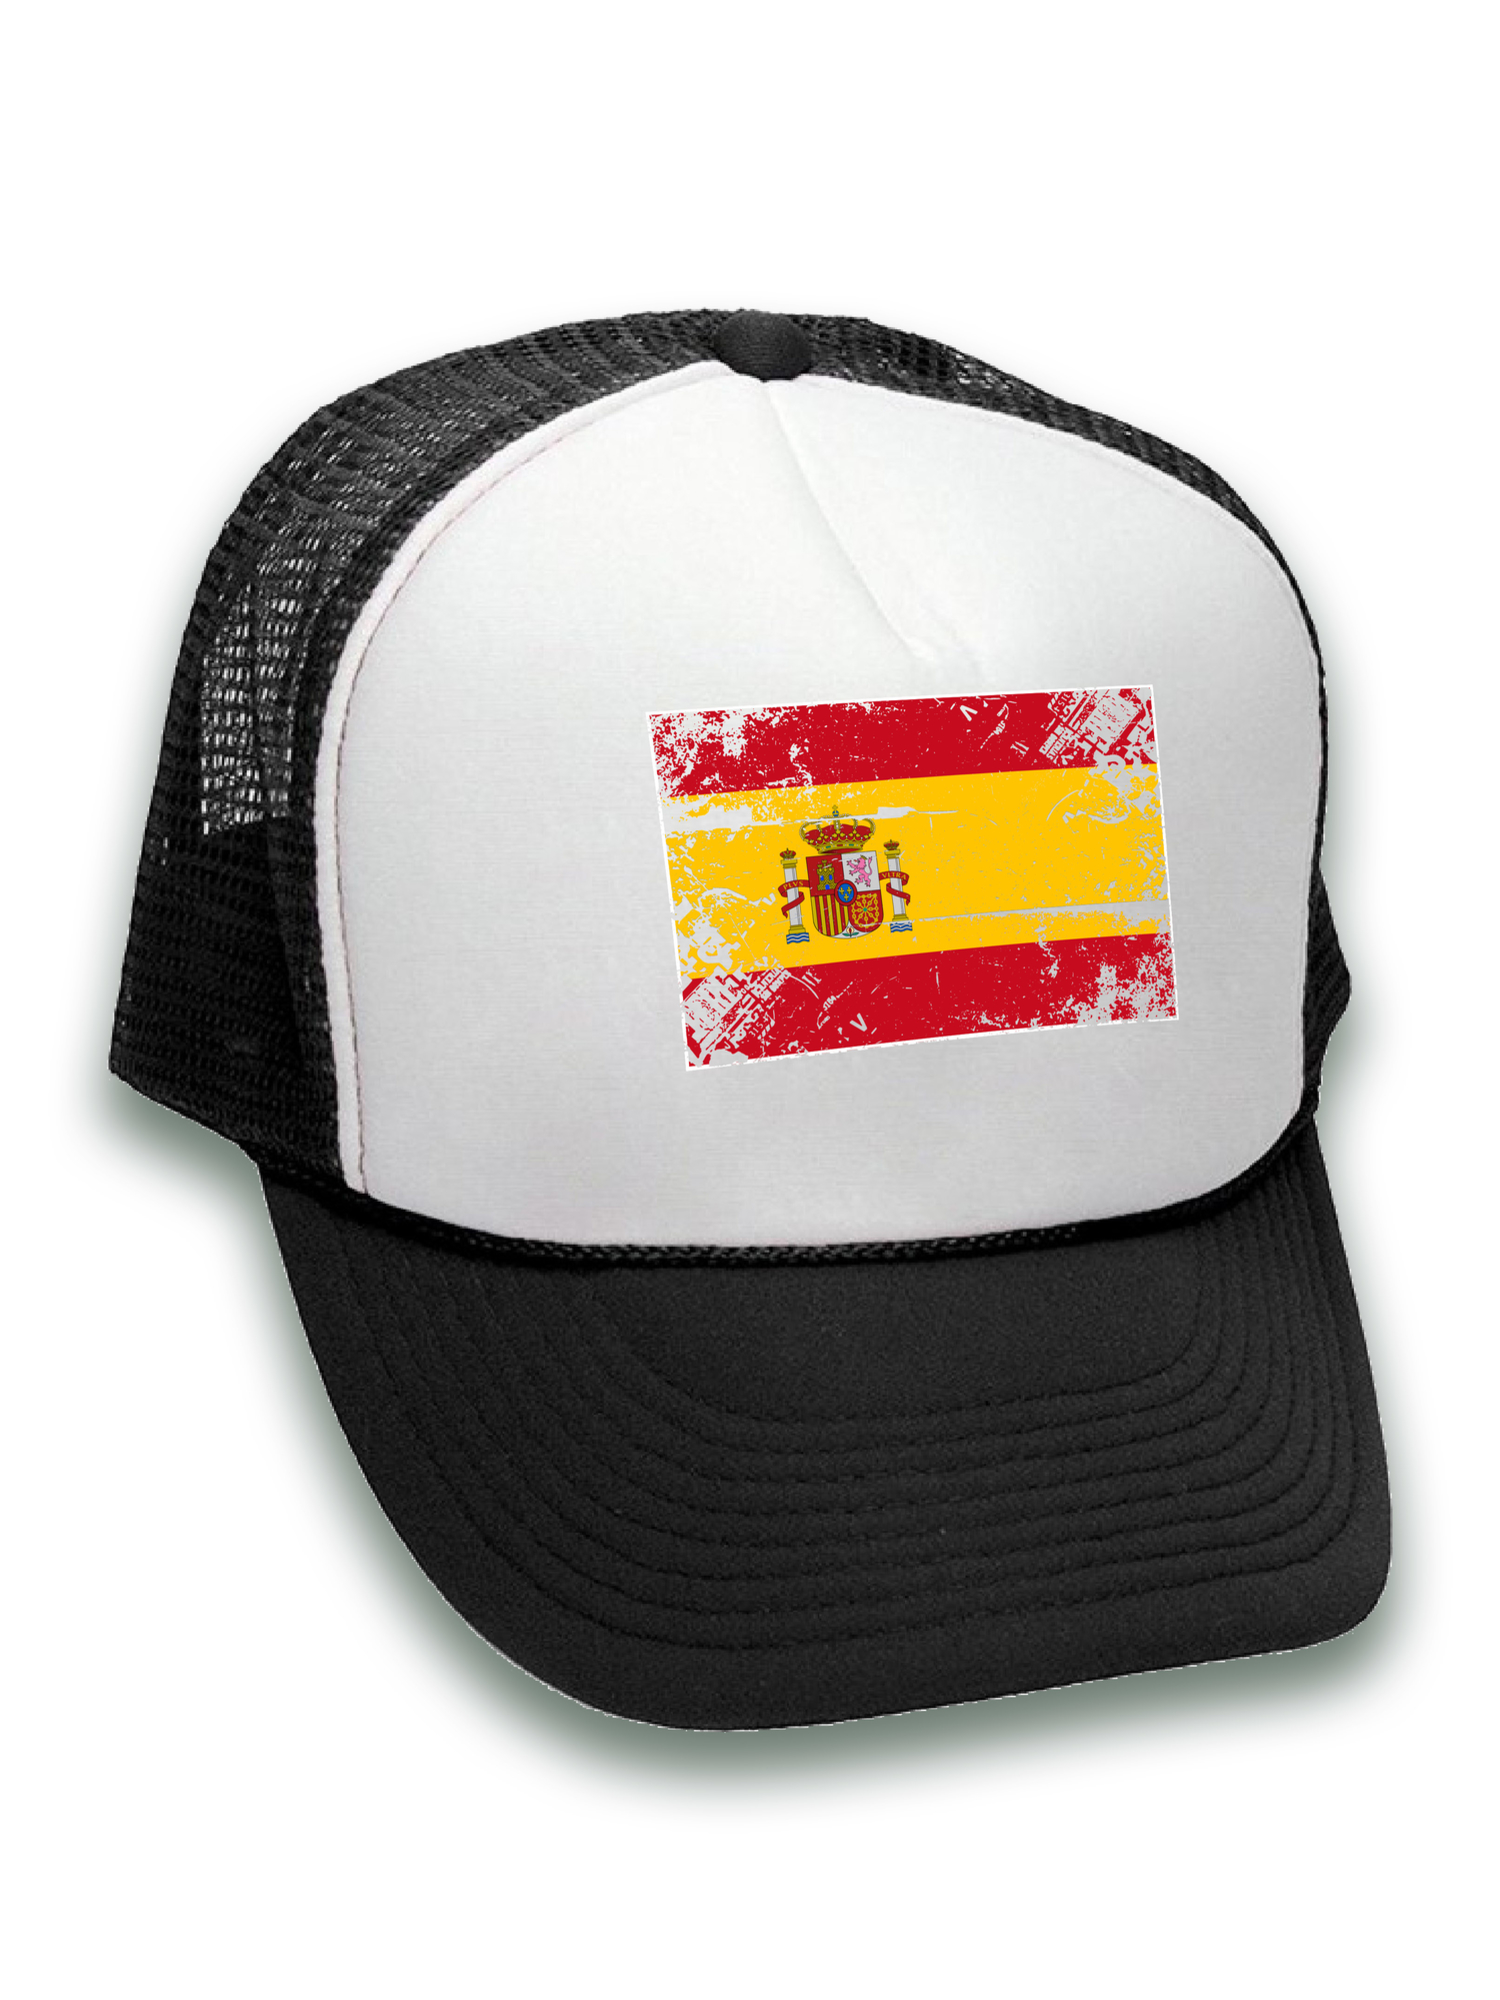 Awkward Styles Spain Flag Hat Spanish Trucker Hat Spain Baseball Cap Amazing Gifts from Spain Spanish Soccer 2018 Hat Spain 2018 Hat for Men and Women Spanish Flag Snapback Hats Spain Gifts - image 2 of 6